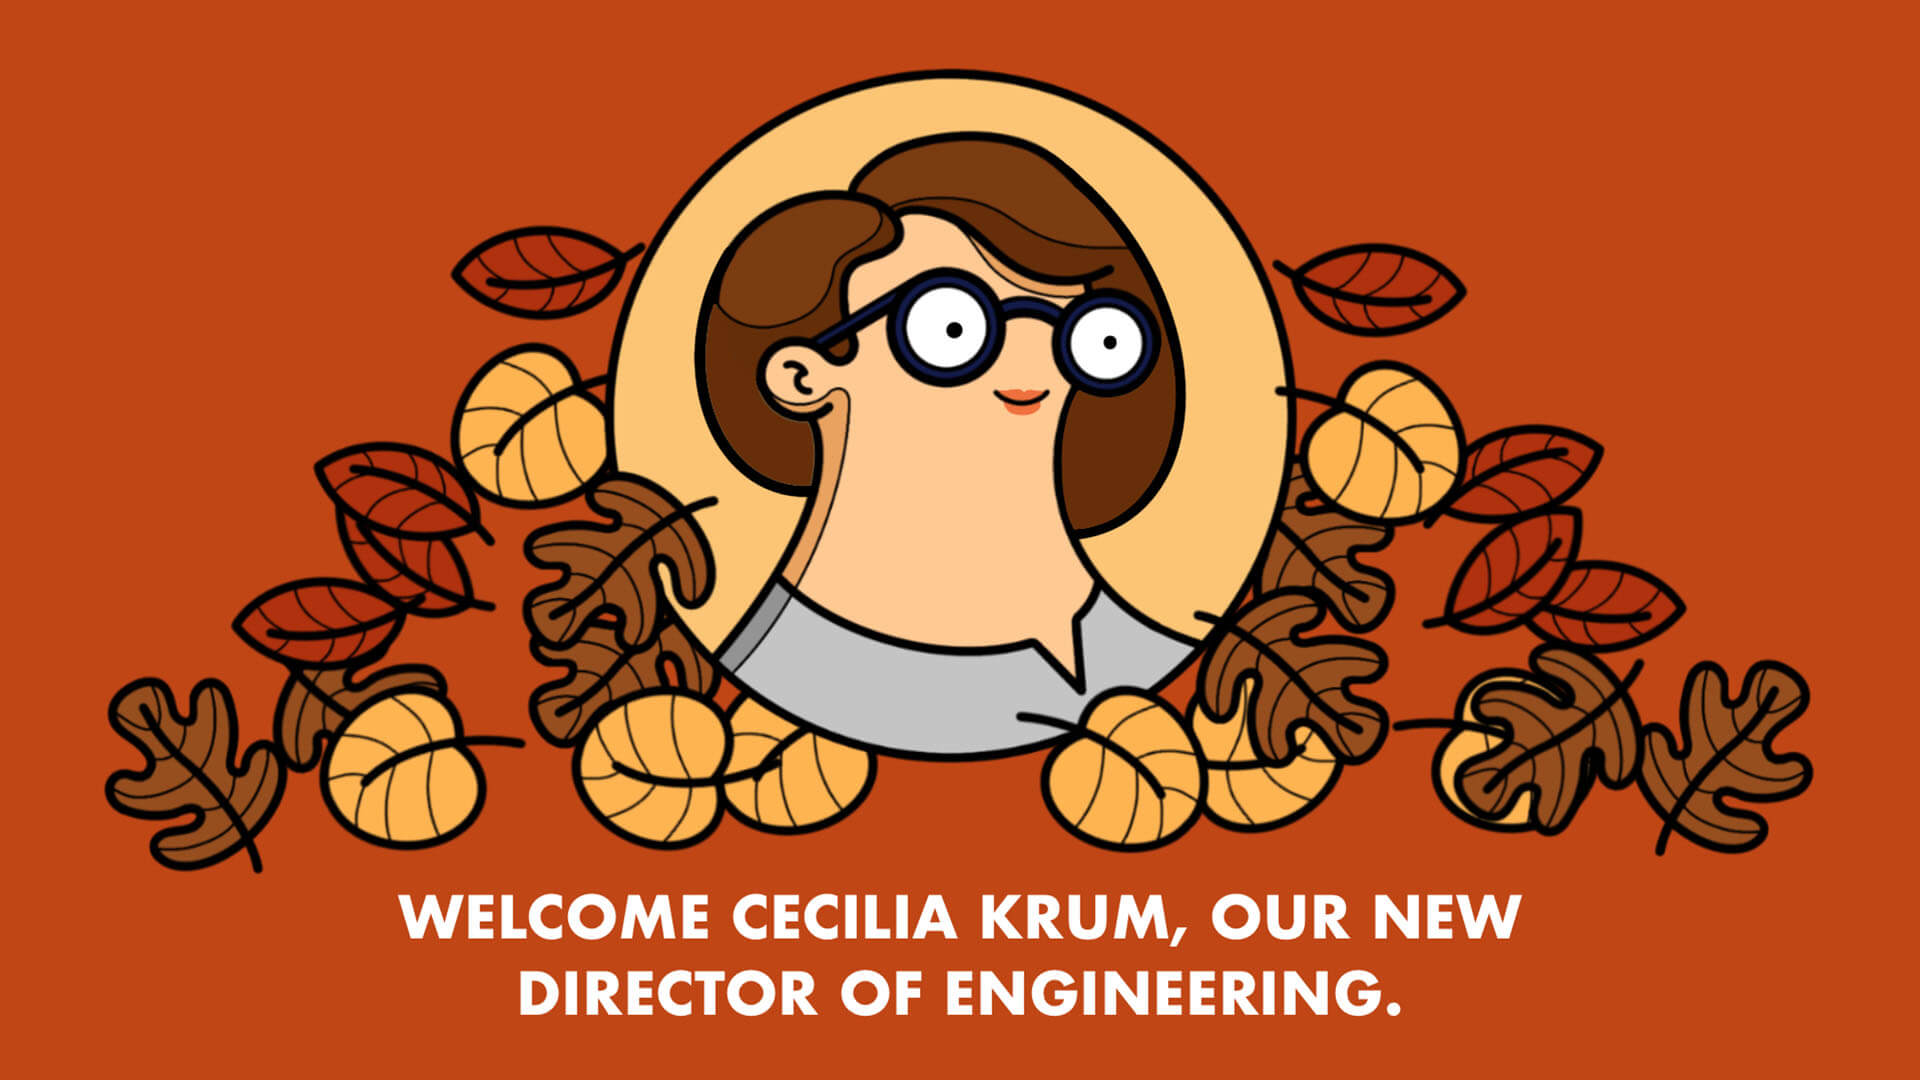 Featured image for “Welcome Cecilia Krum, Our New Director of Engineering”